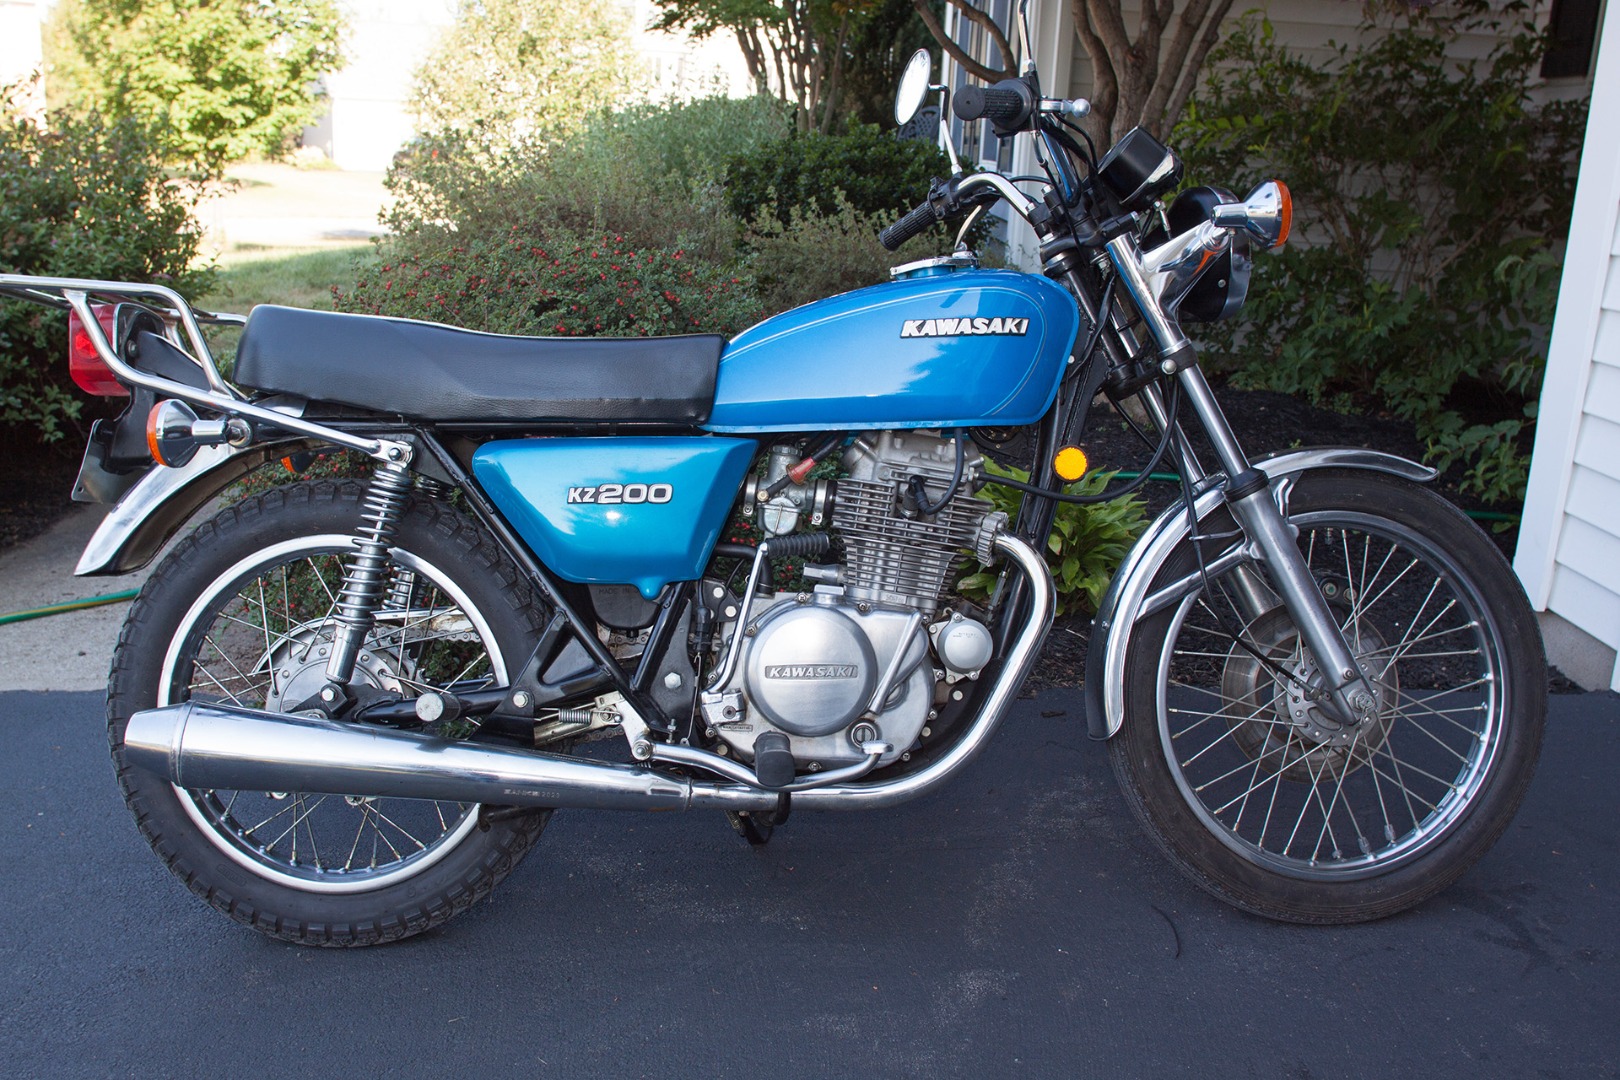 KZ200 shifting after it on centerstand while - KZRider Forum - KZRider, KZ, Z1 & Z Motorcycle Enthusiast's Forum